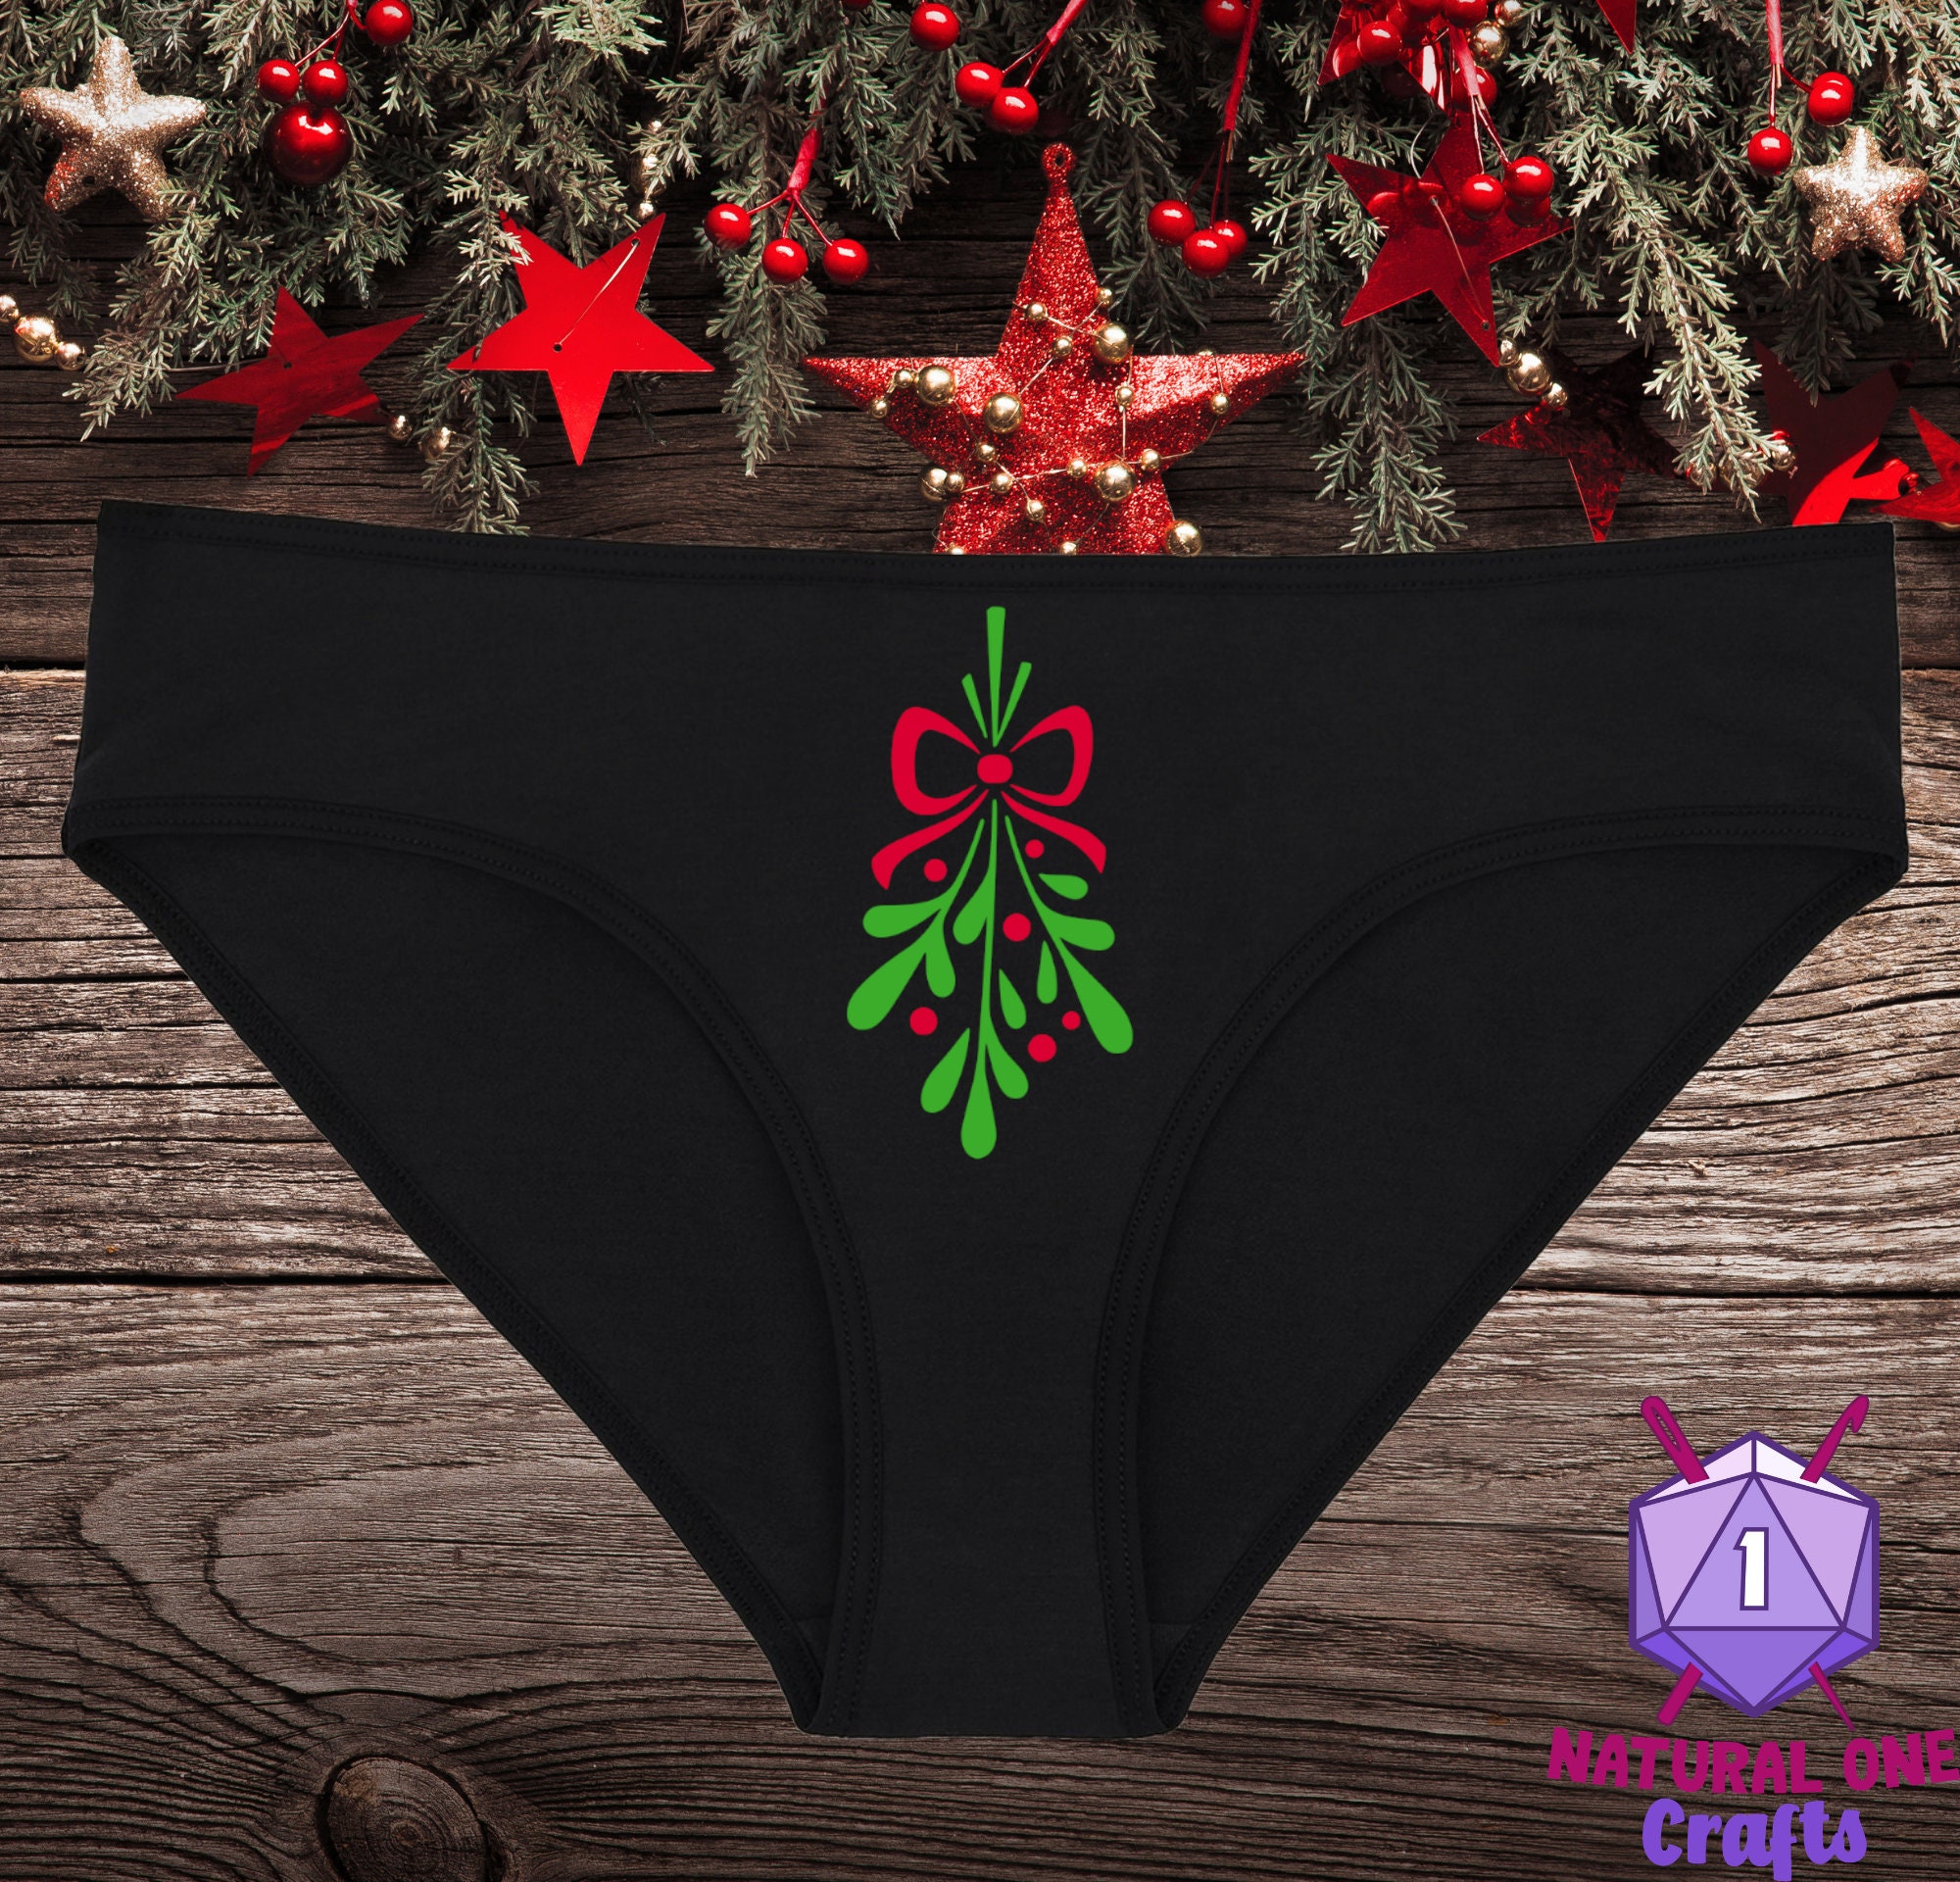 Mistletoe Black Underwear, Dainty & Dangerous Christmas Panties, Great  Holiday Lingerie, Multiple Sizes Available Small-3xl -  Canada